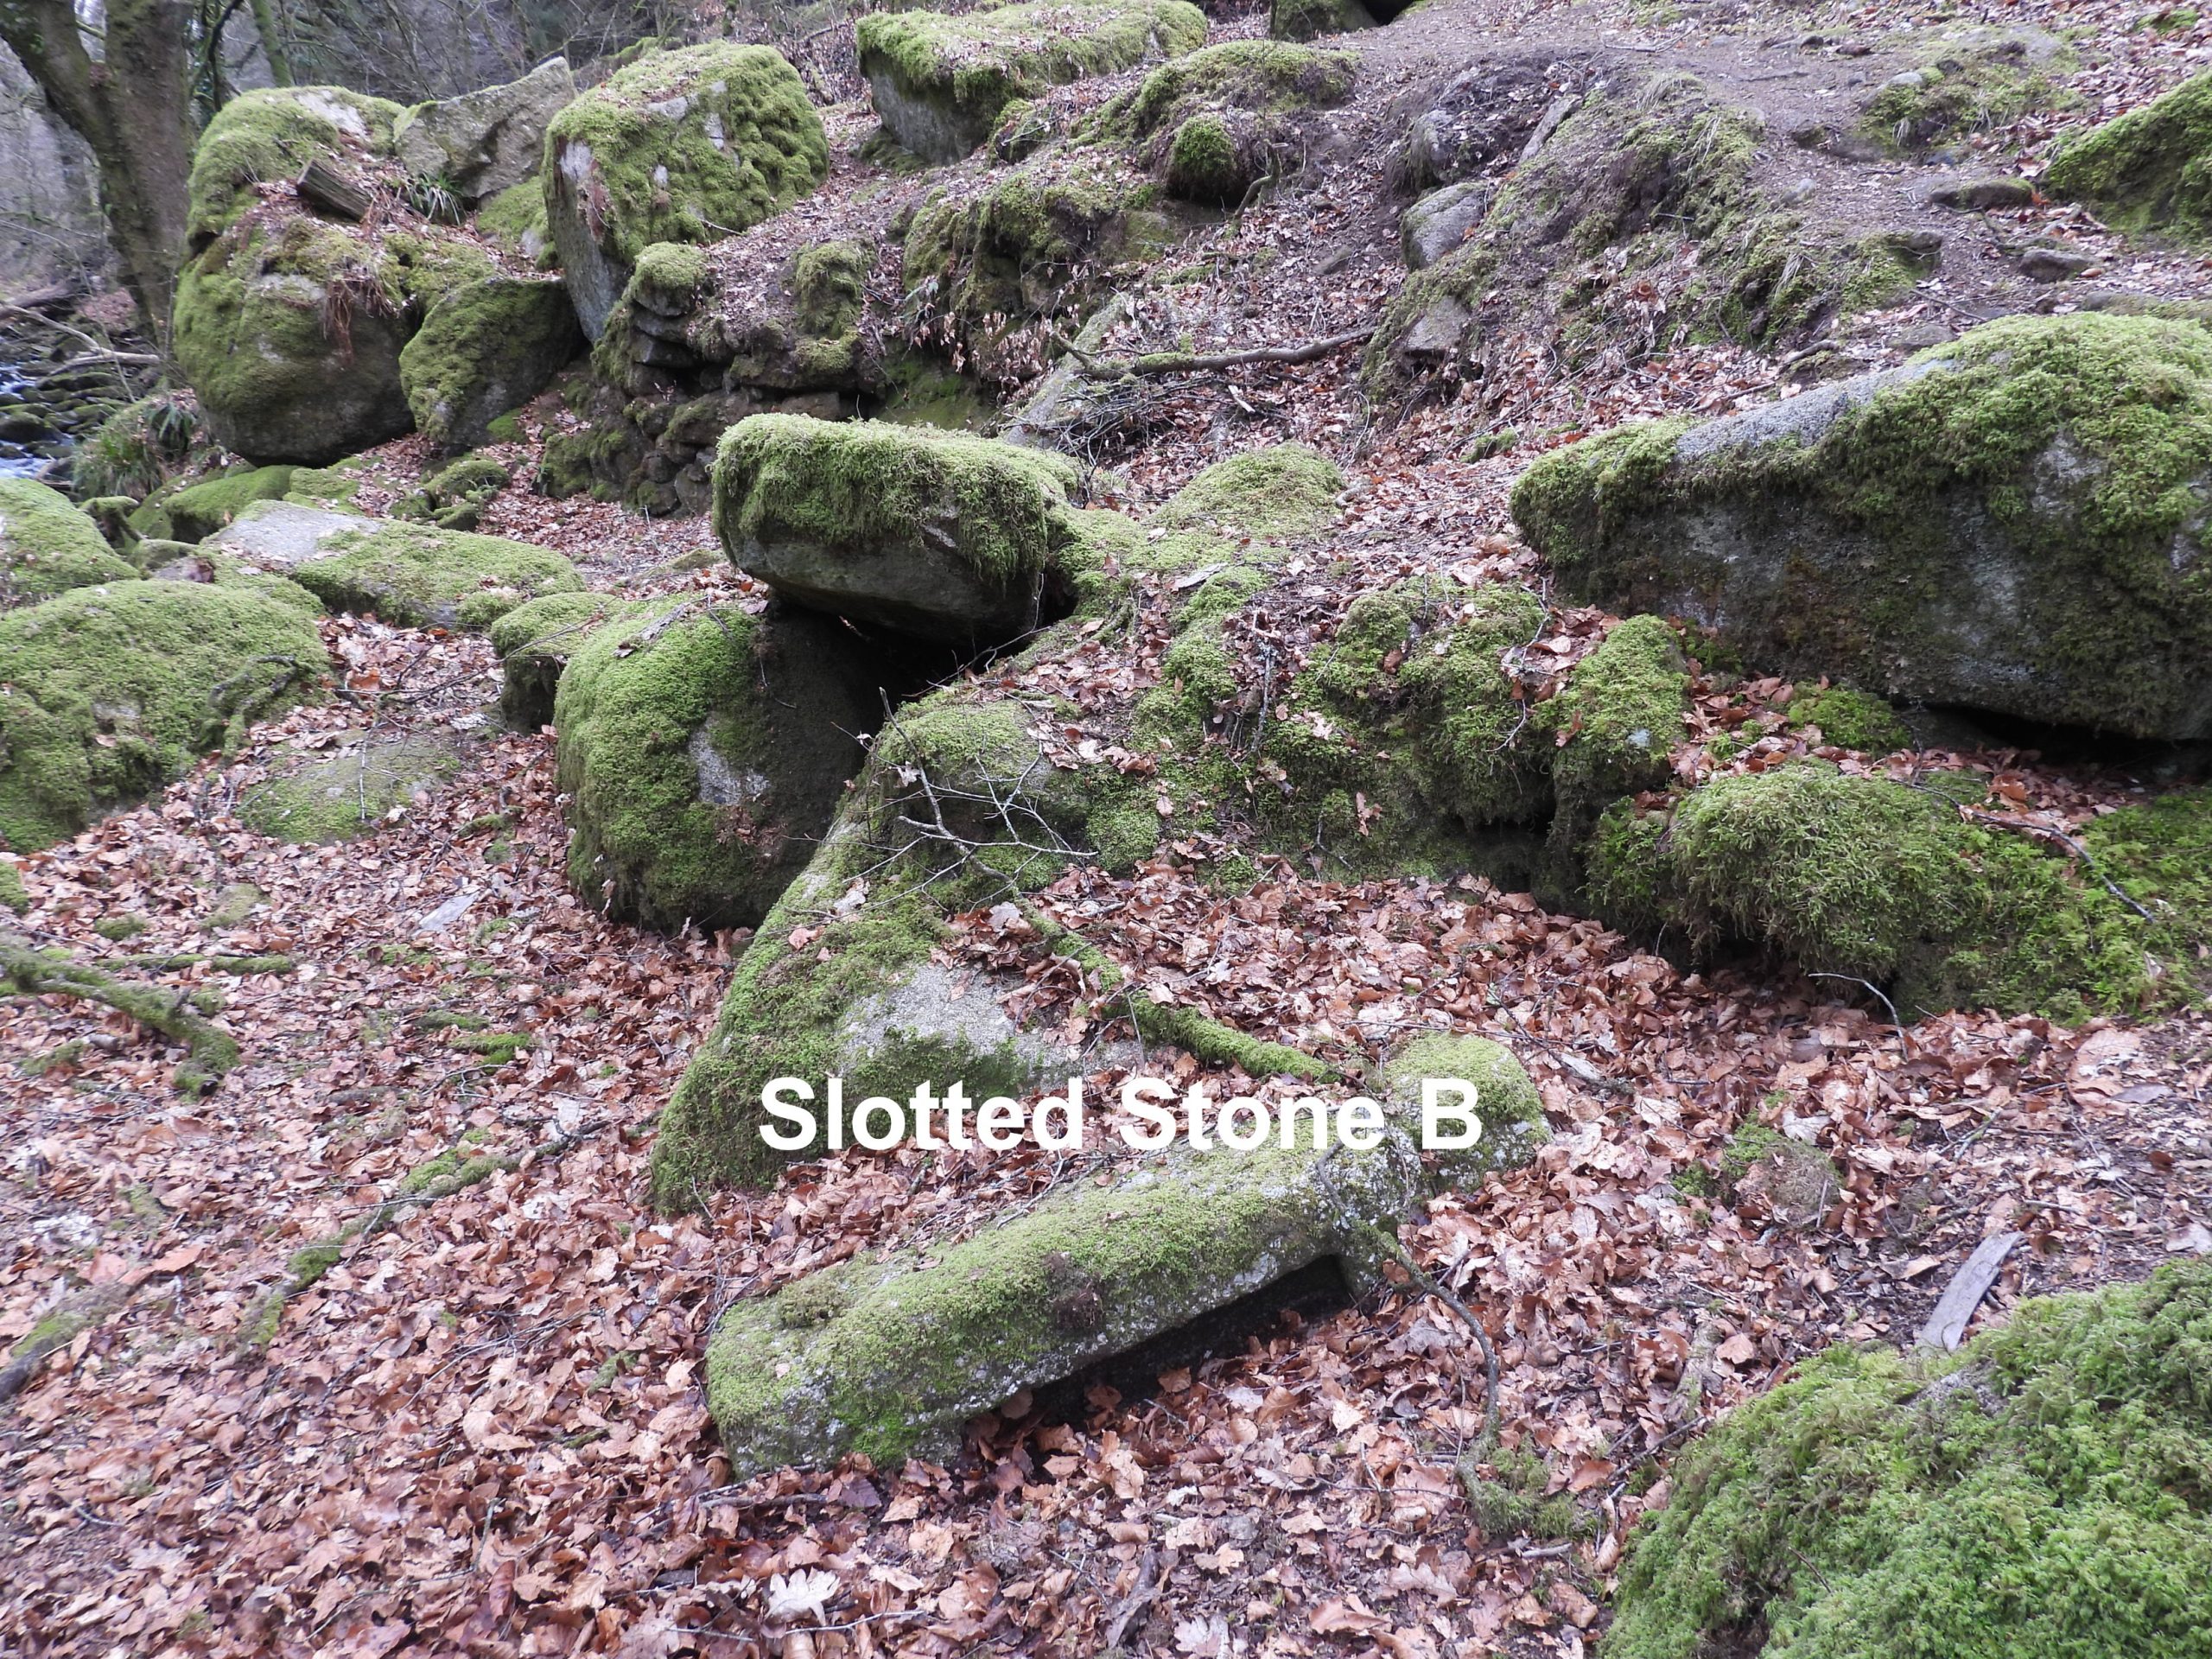 19. Slotted Stone B